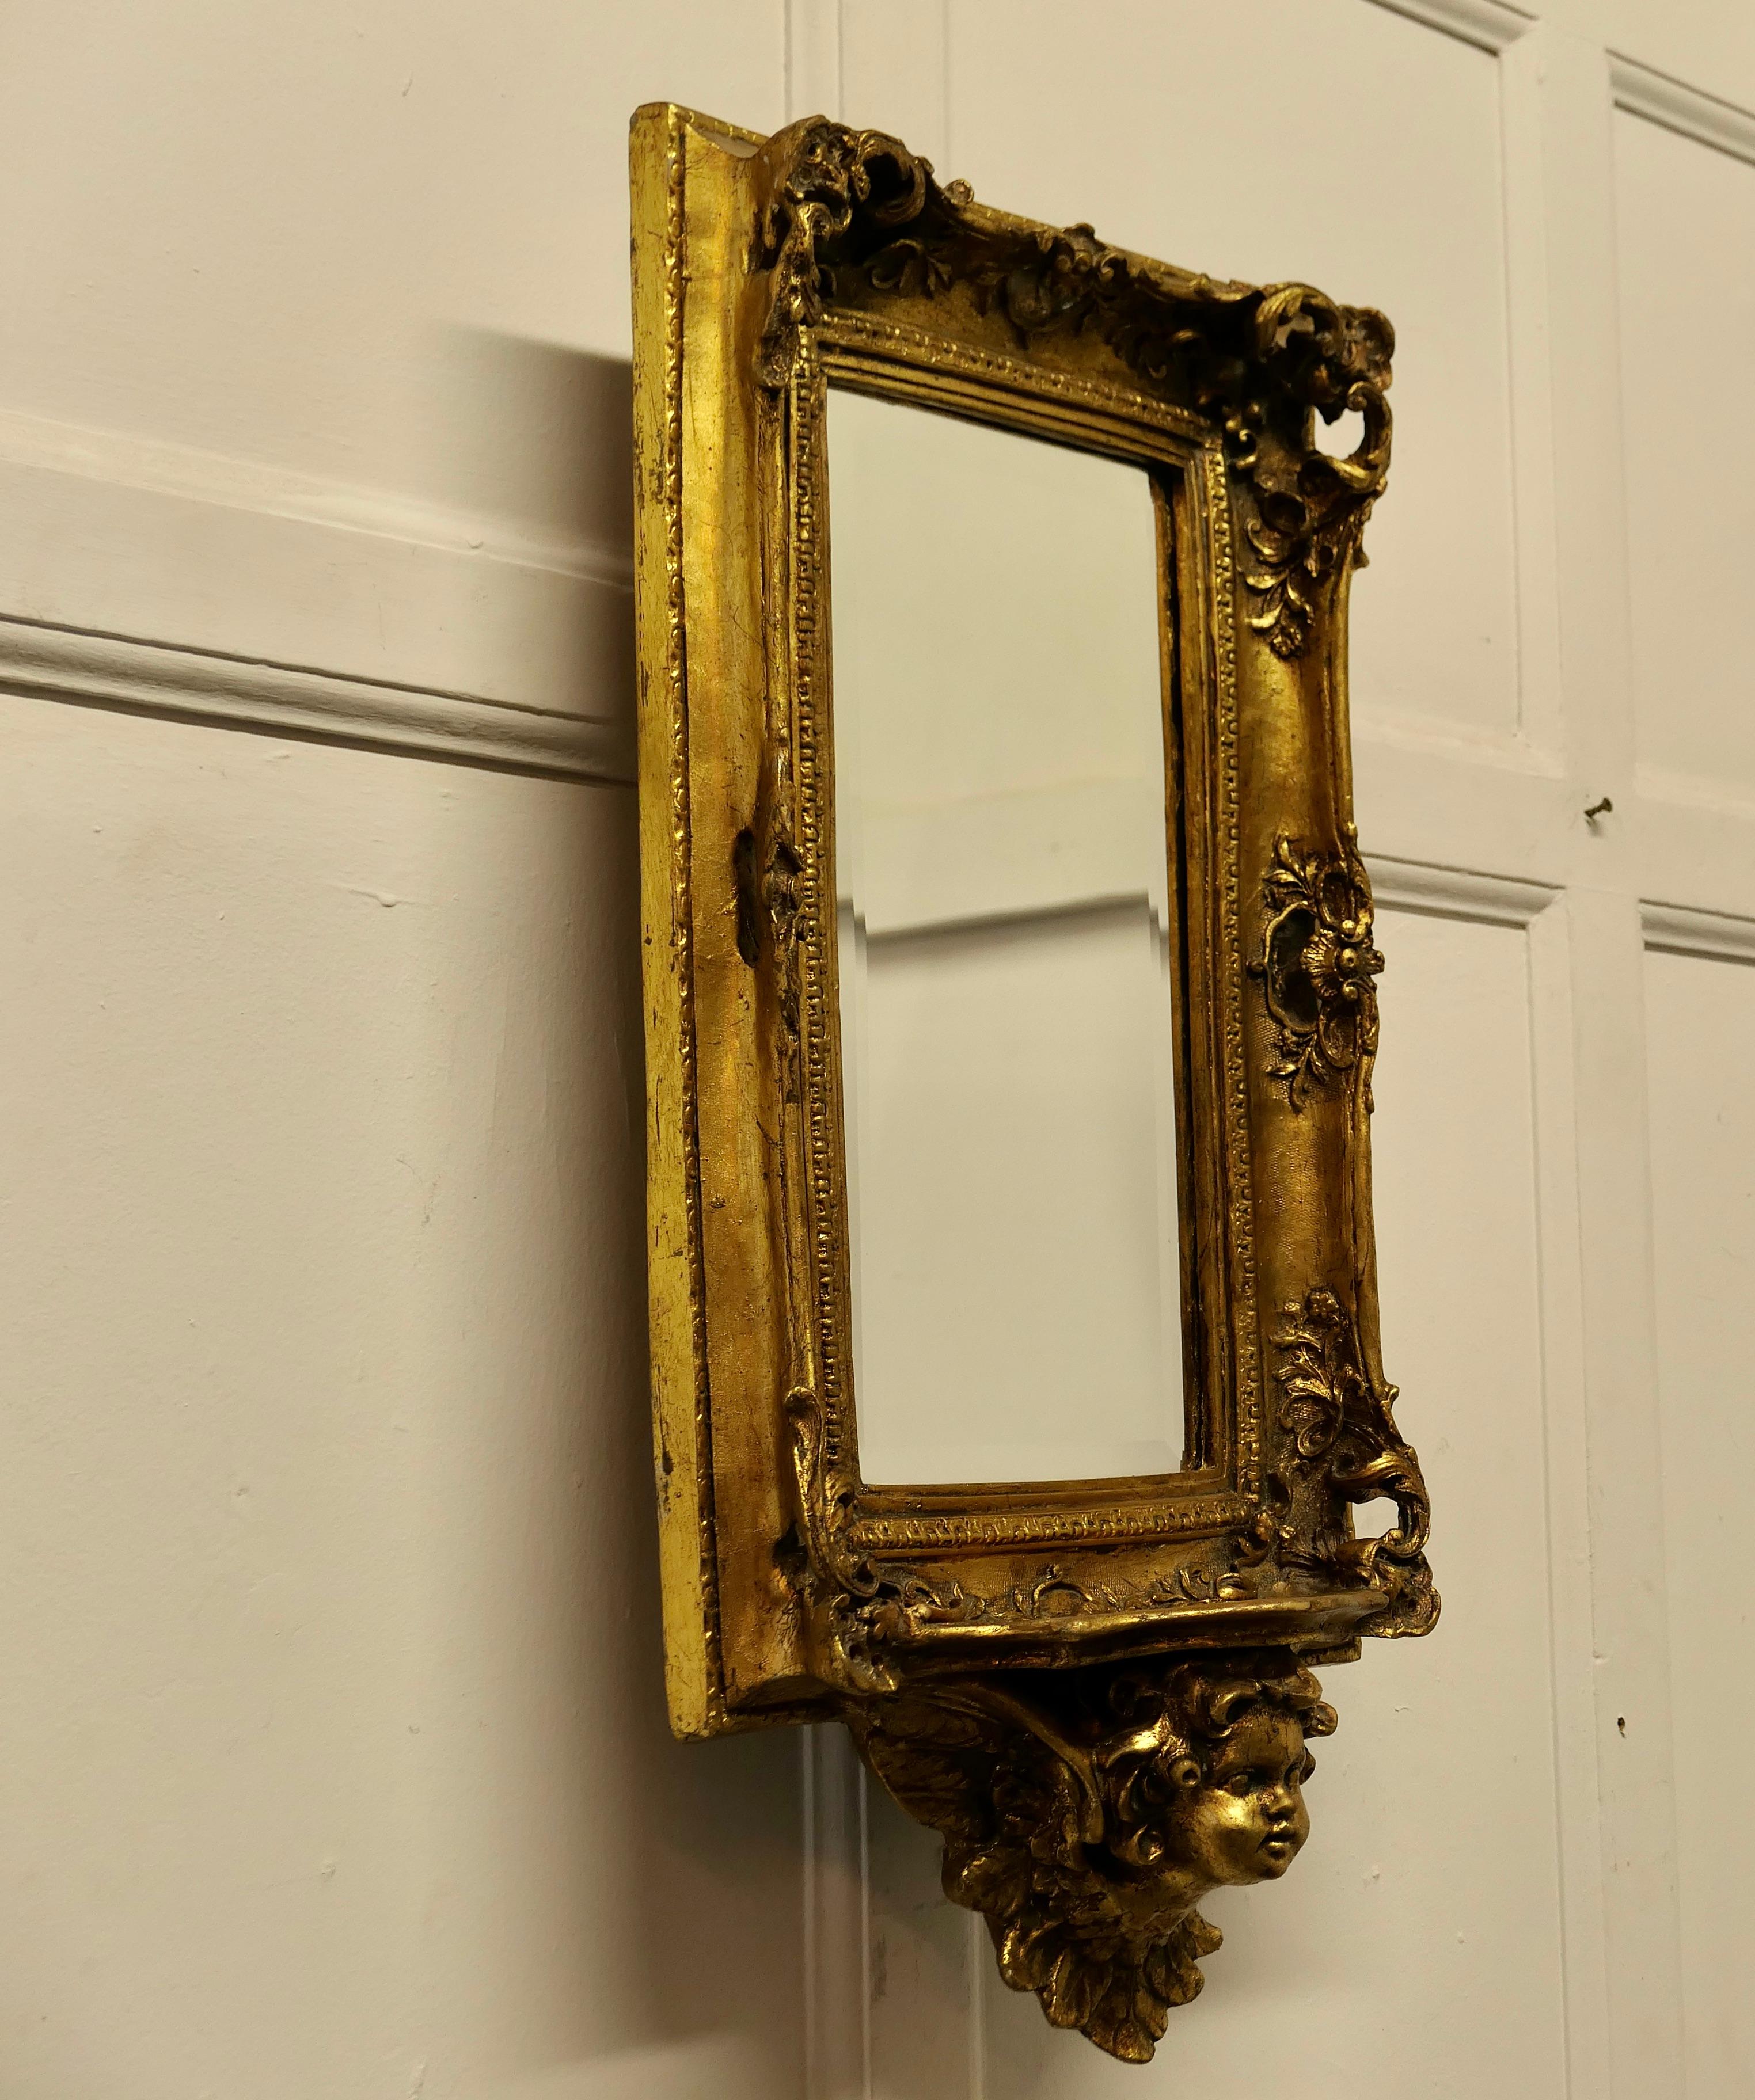 Rococo Revival Rococo Style Gilt Wall Mirror with Putti and Shelf Bracket  For Sale